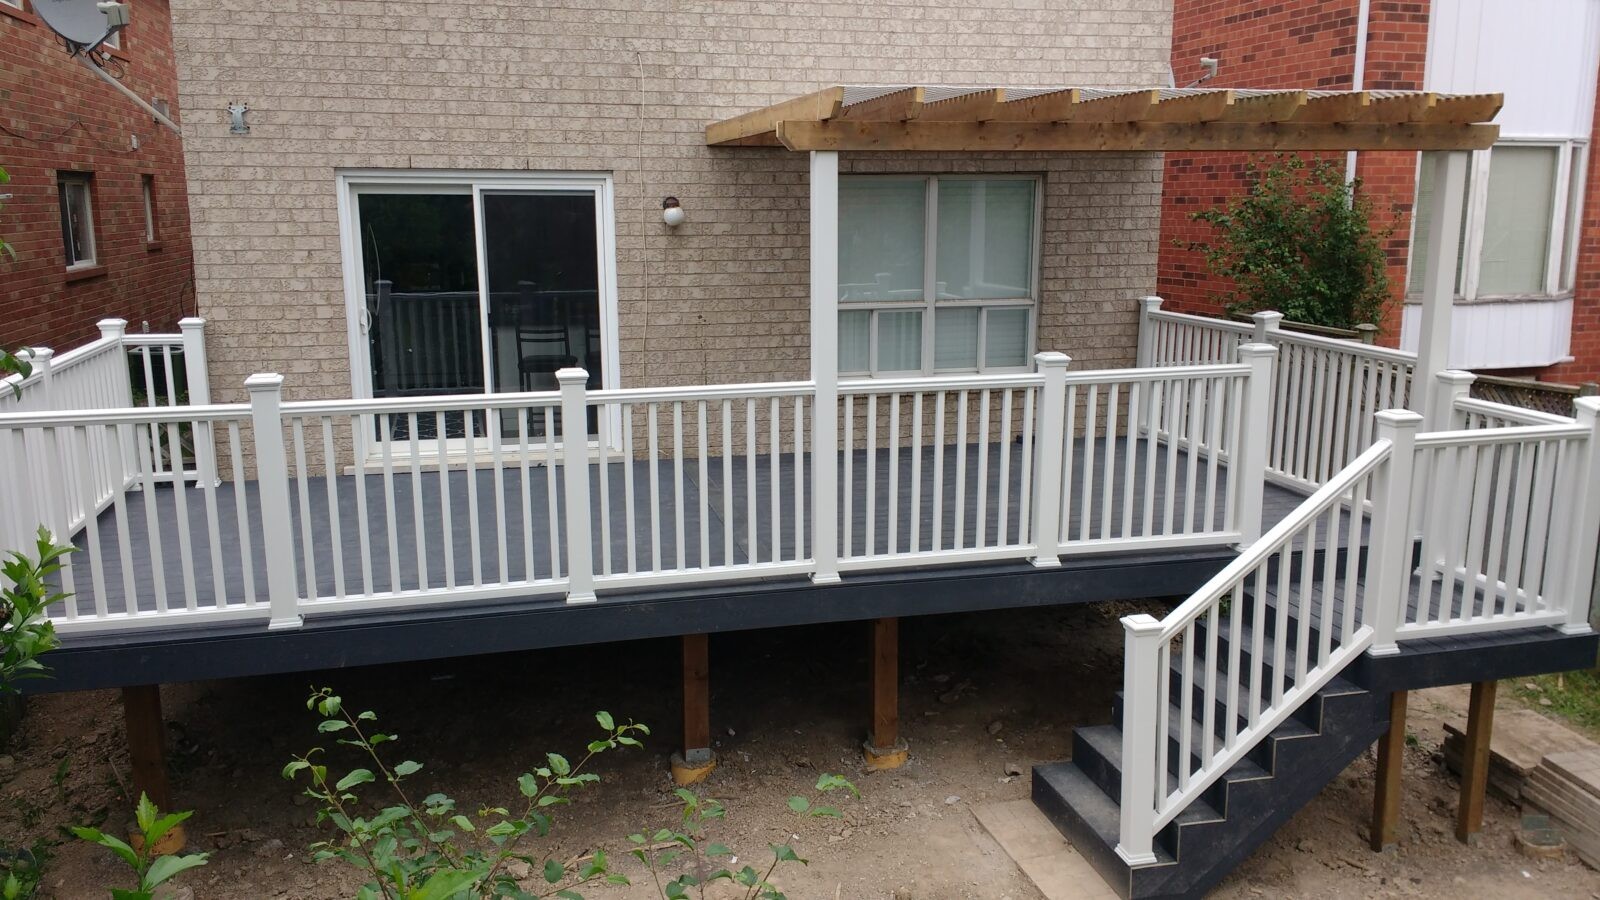 Contact The Deck Master For A Better Deck Southwestern Ontario.